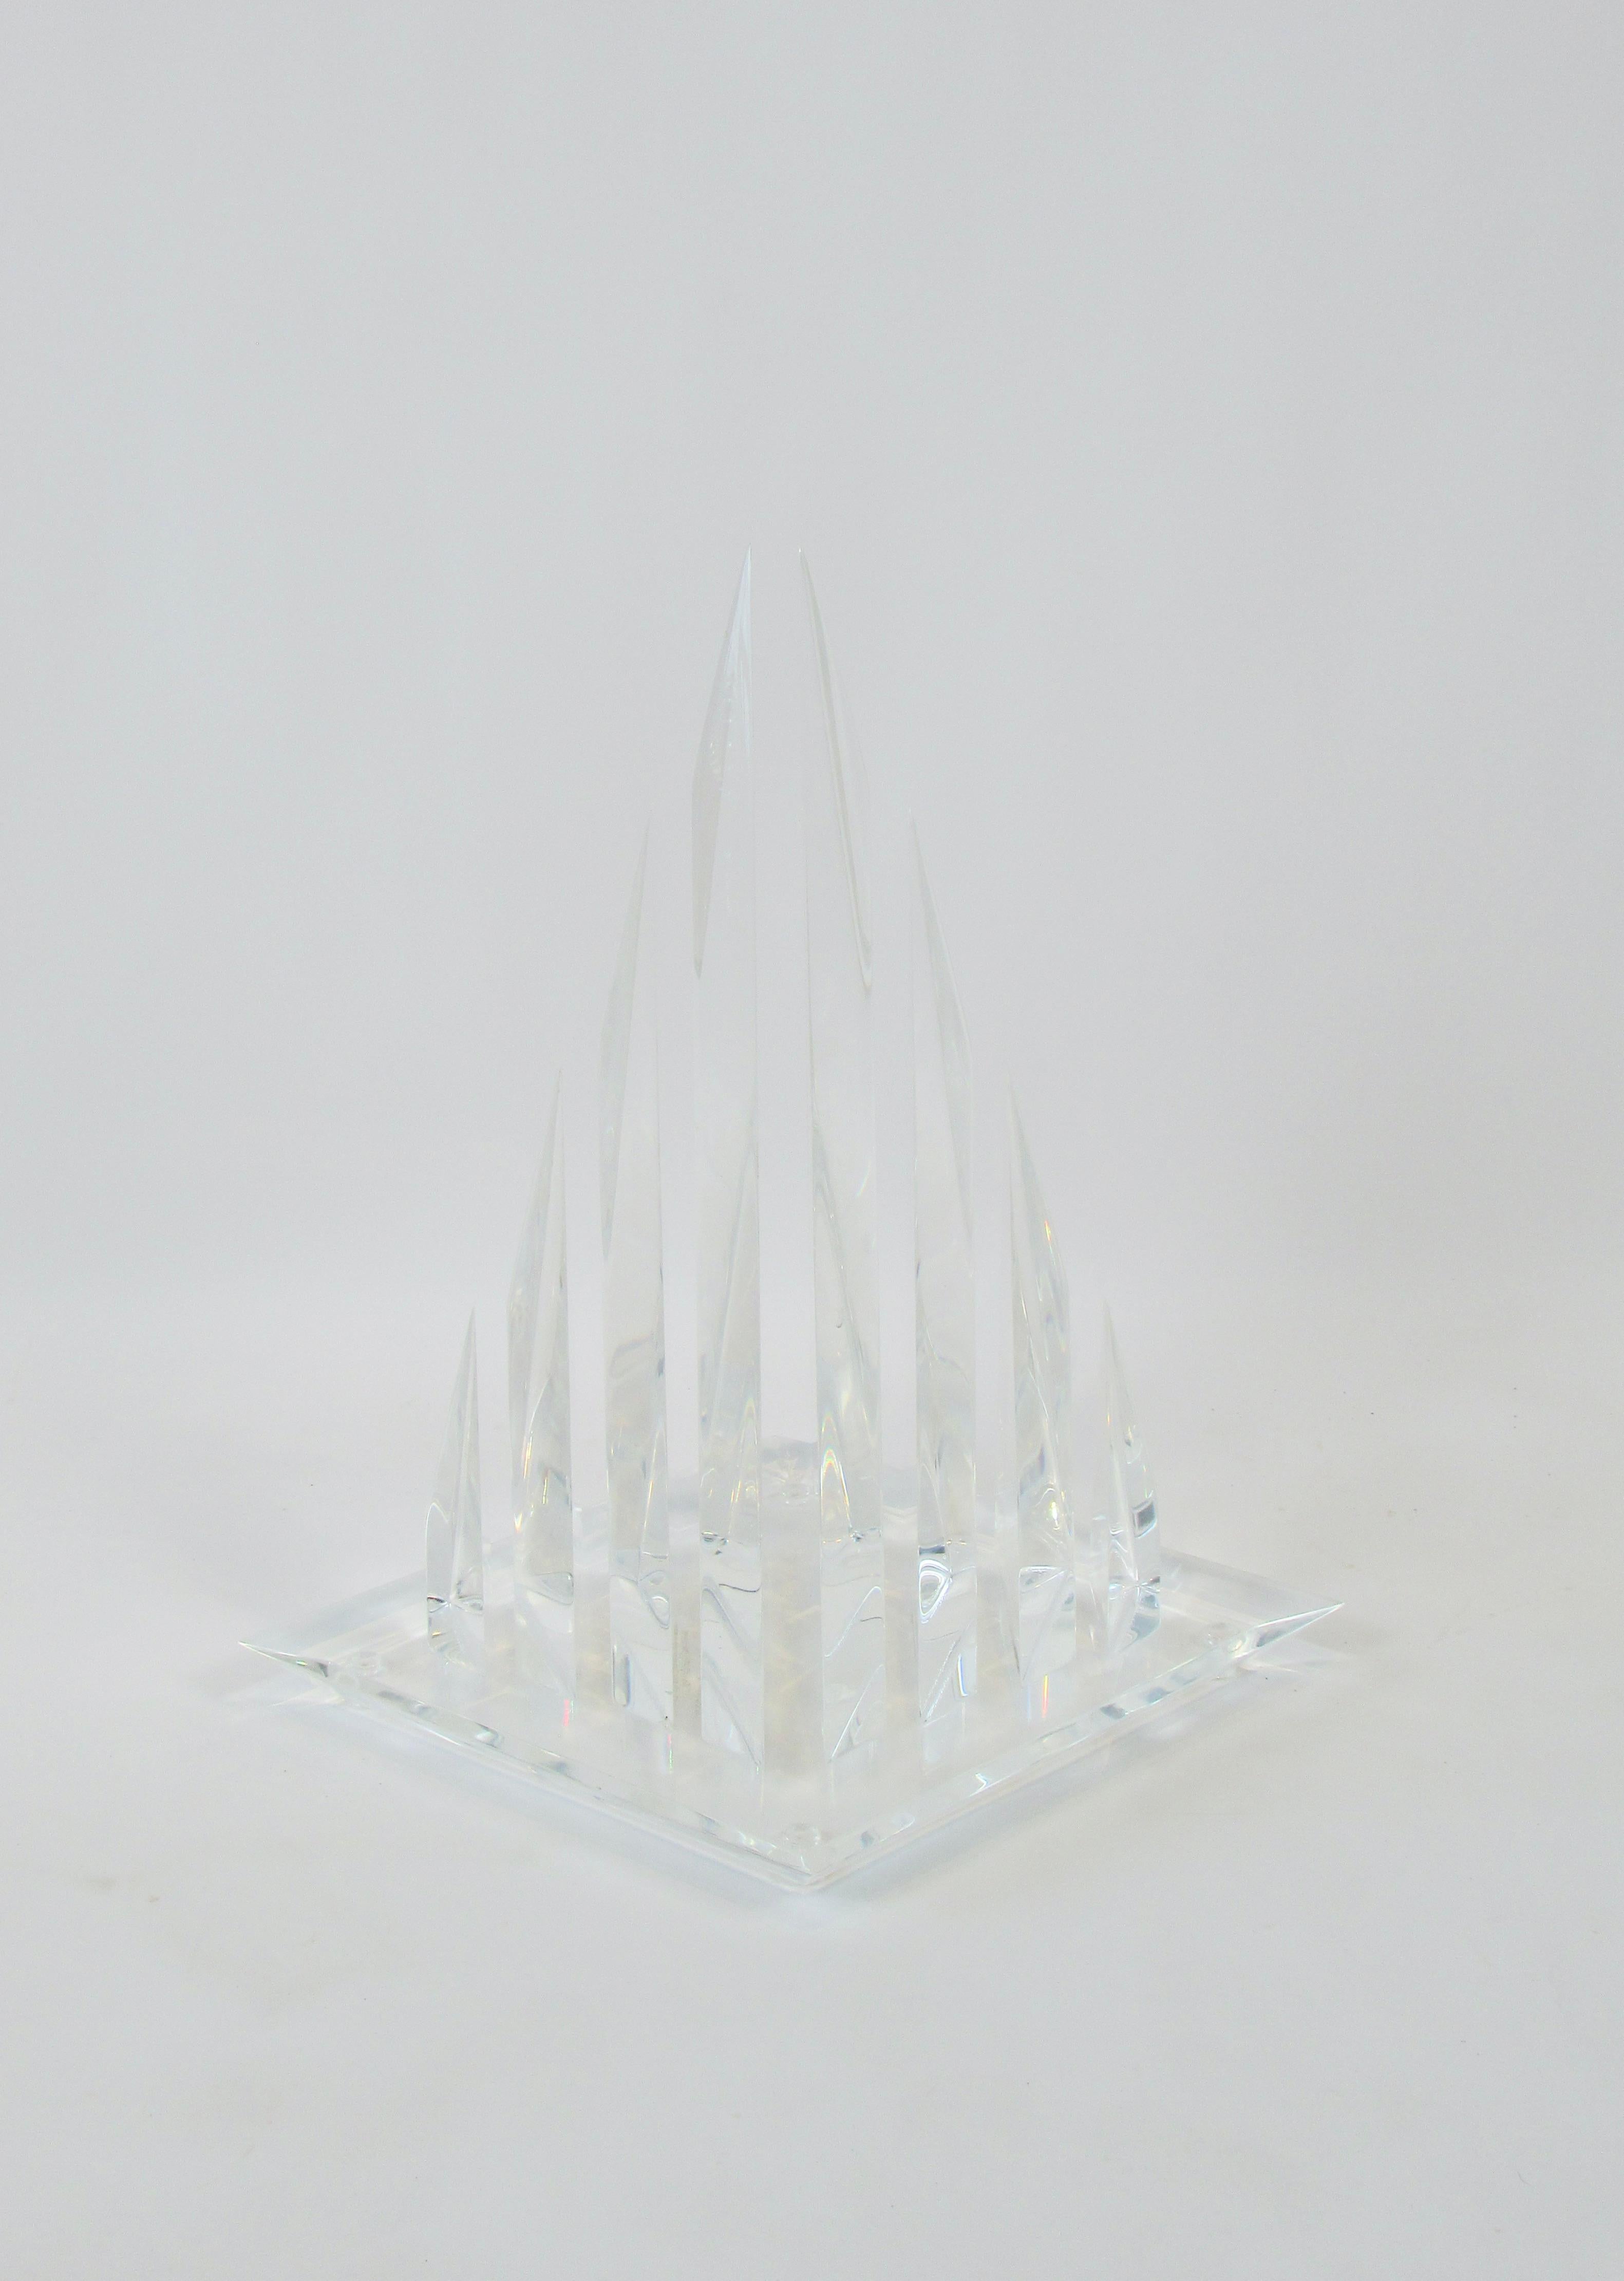 Hivo Van Teal Segmented Lucite Pyramid, Triangle Sculpture For Sale 3